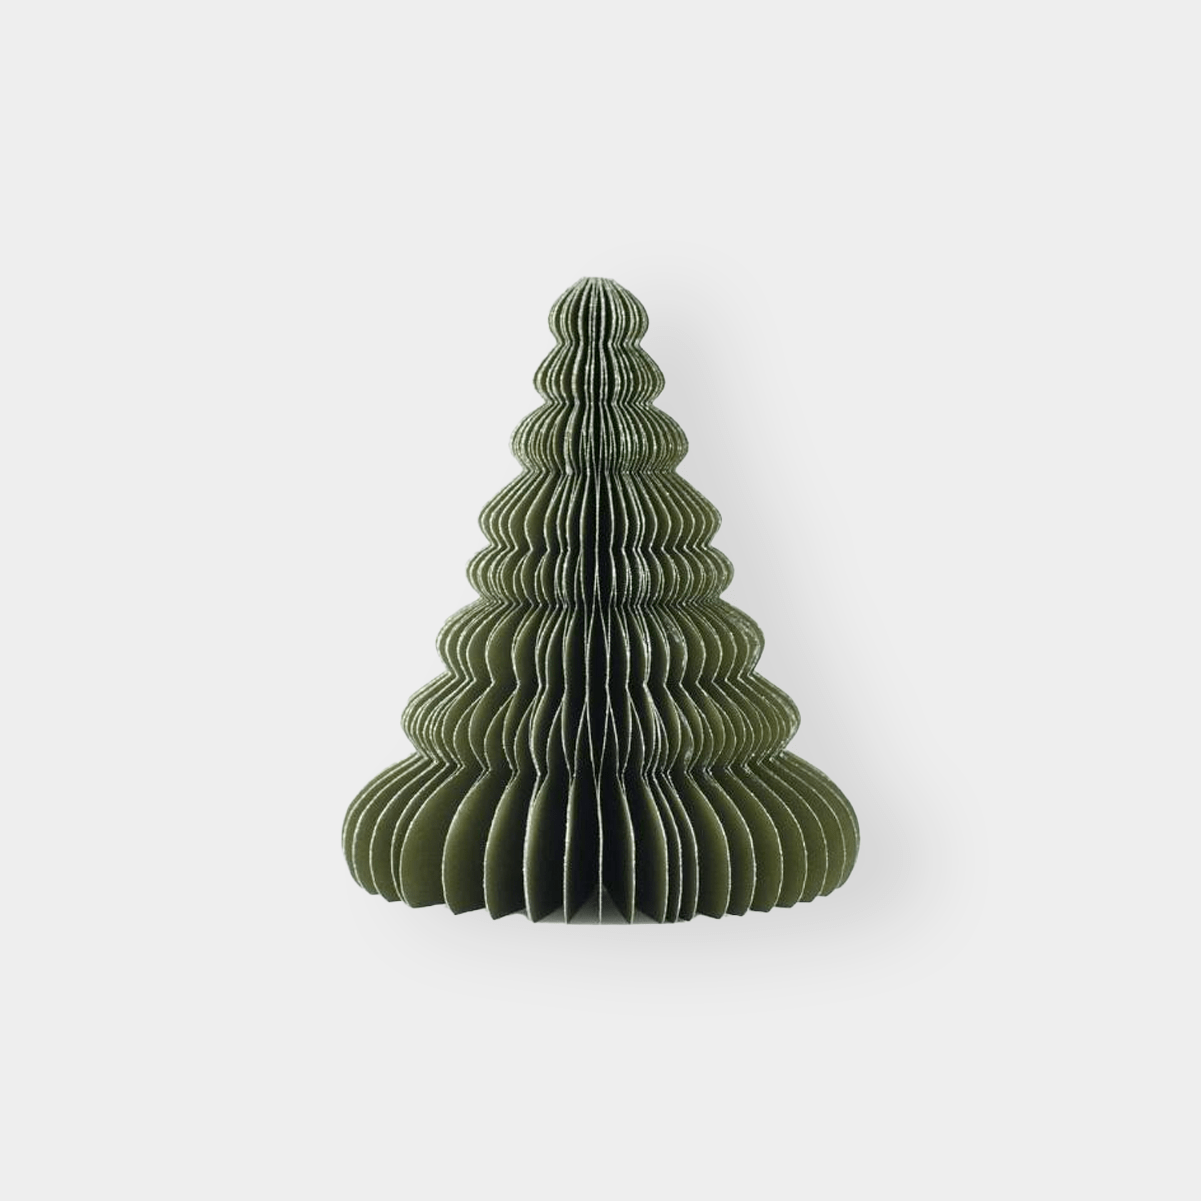 Nordic Rooms Christmas Decorations Christmas Tree Standing Ornament - Olive with Silver Glitter Edge, 15cm